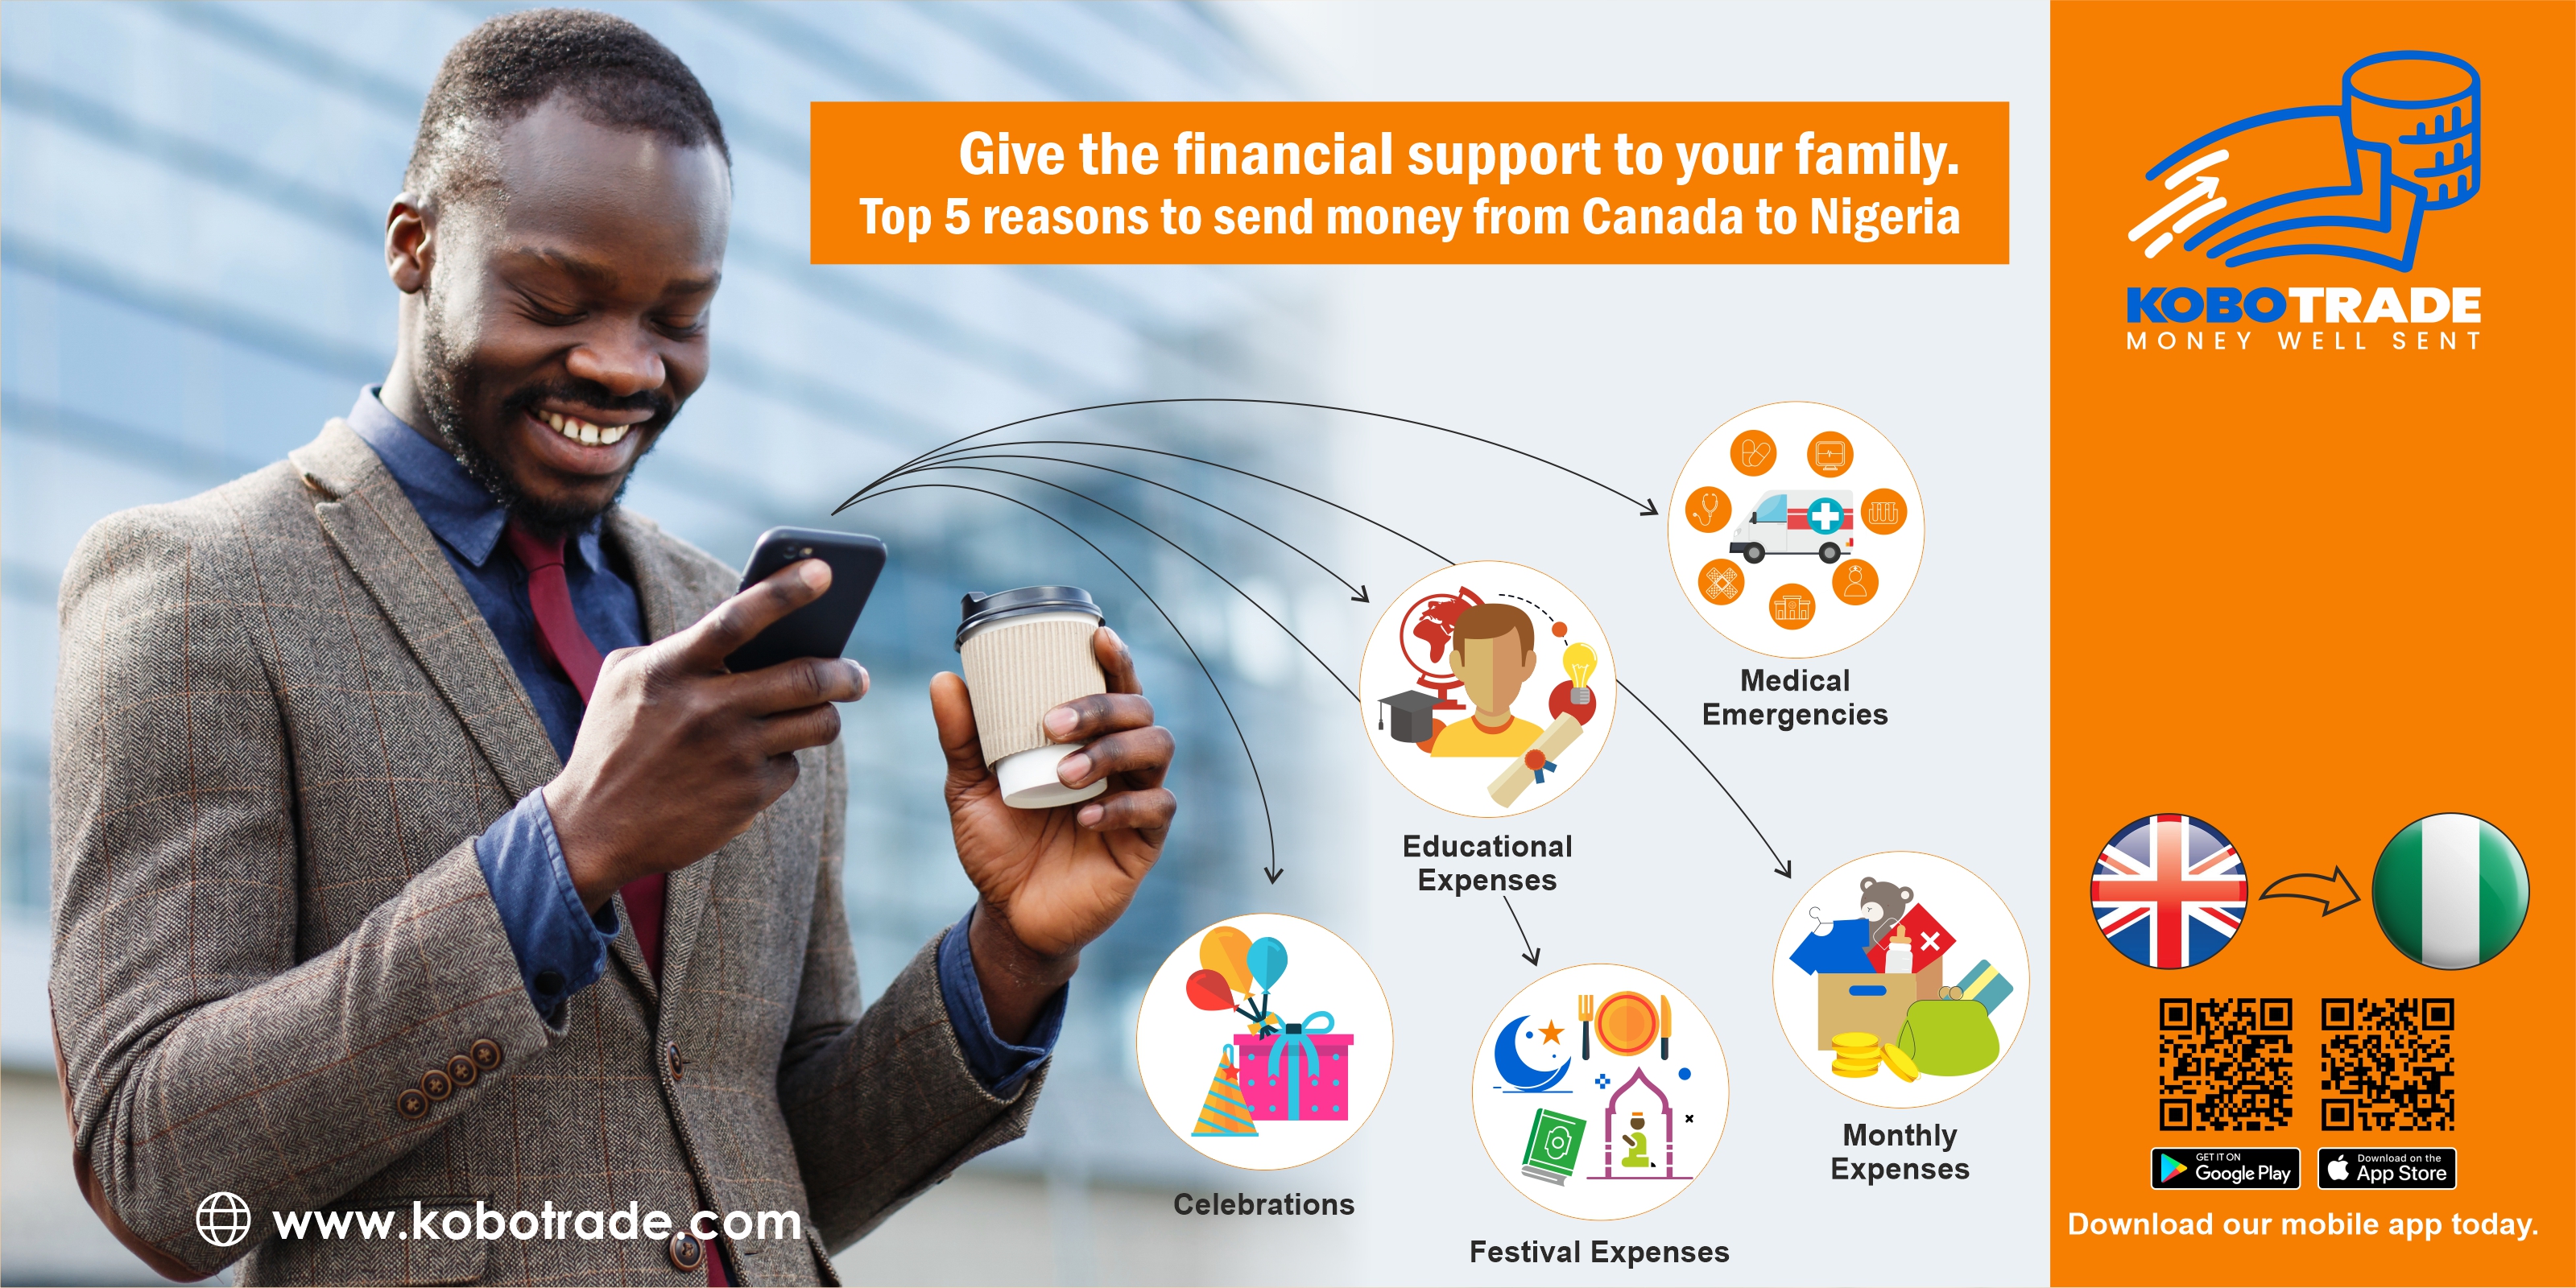 International Remittance: Top 5 reasons to send money from Canada to Nigeria 